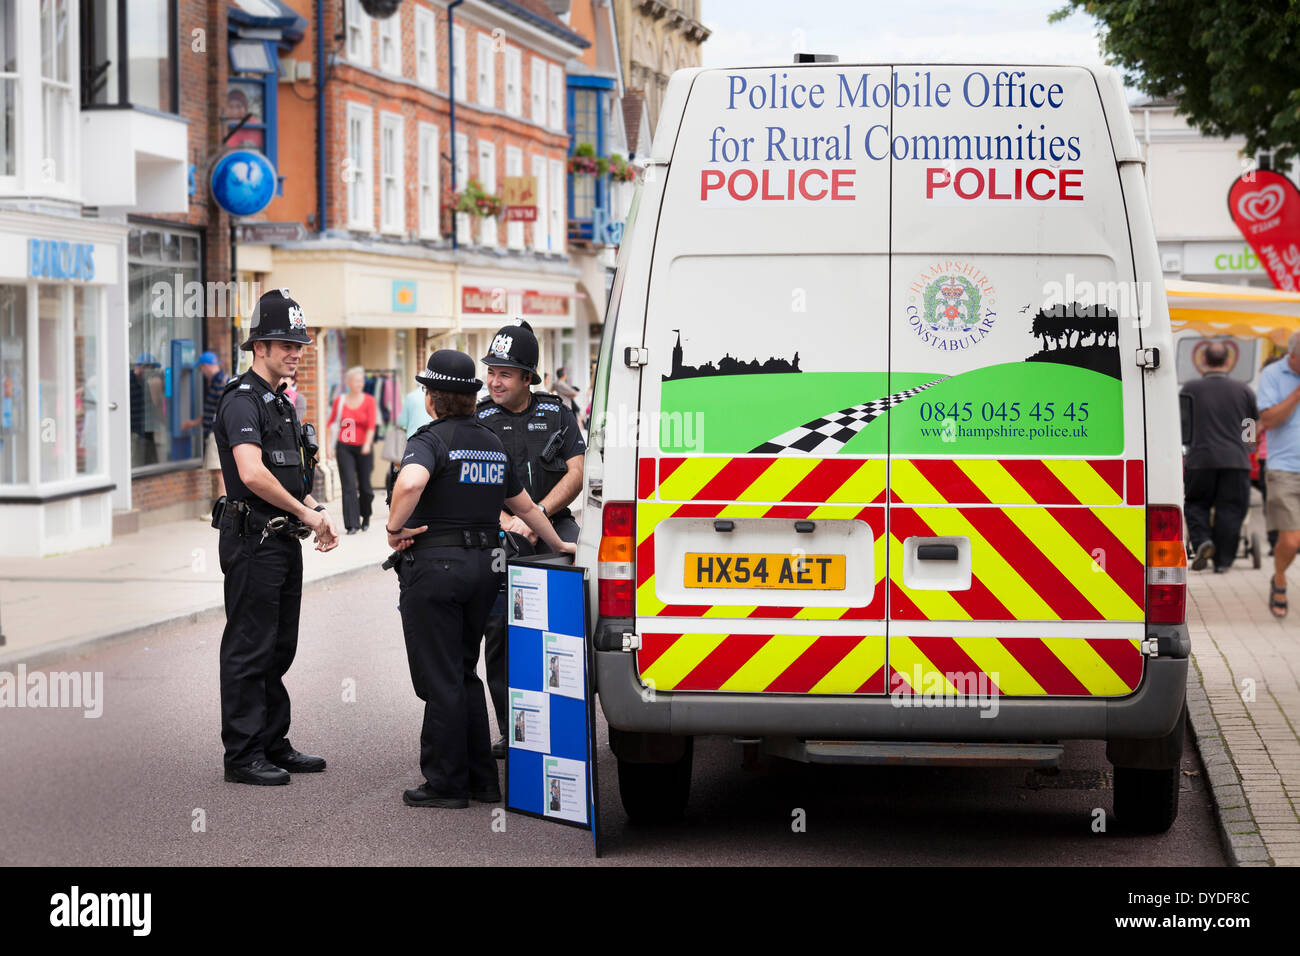 Policemen and women by police rural communities mobile office van in town high street. Stock Photo